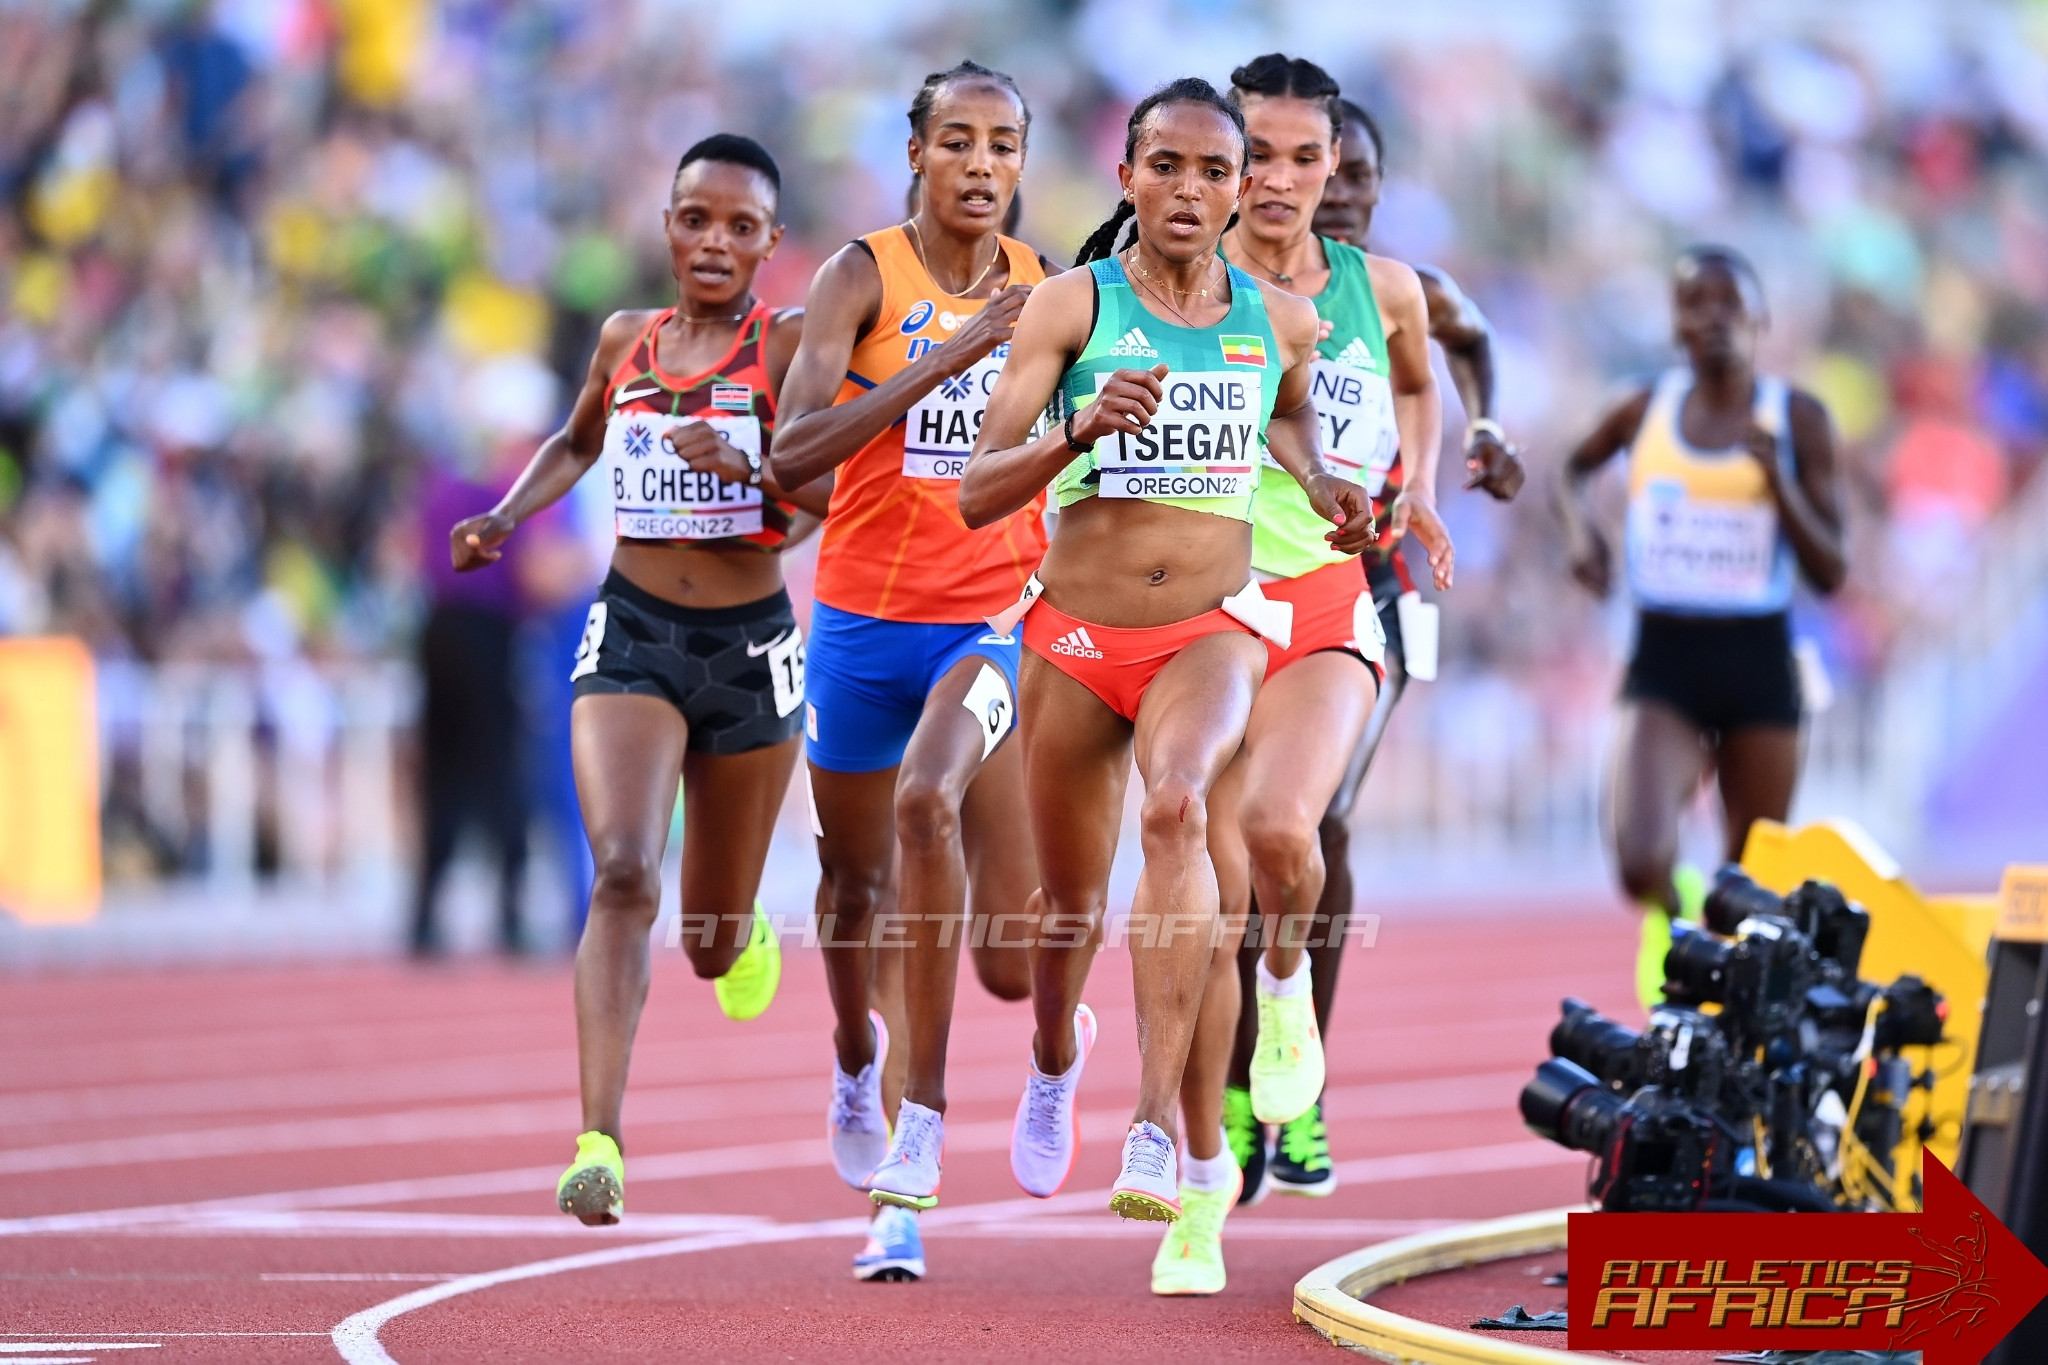 Gudaf Tsegay of Team Ethiopia competes in the Women's 5000m Final on day nine of the World Athletics Championships Oregon22 at Hayward Field on July 23, 2022 in Eugene, Oregon. (Photo by Hannah Peters/Getty Images for World Athletics)